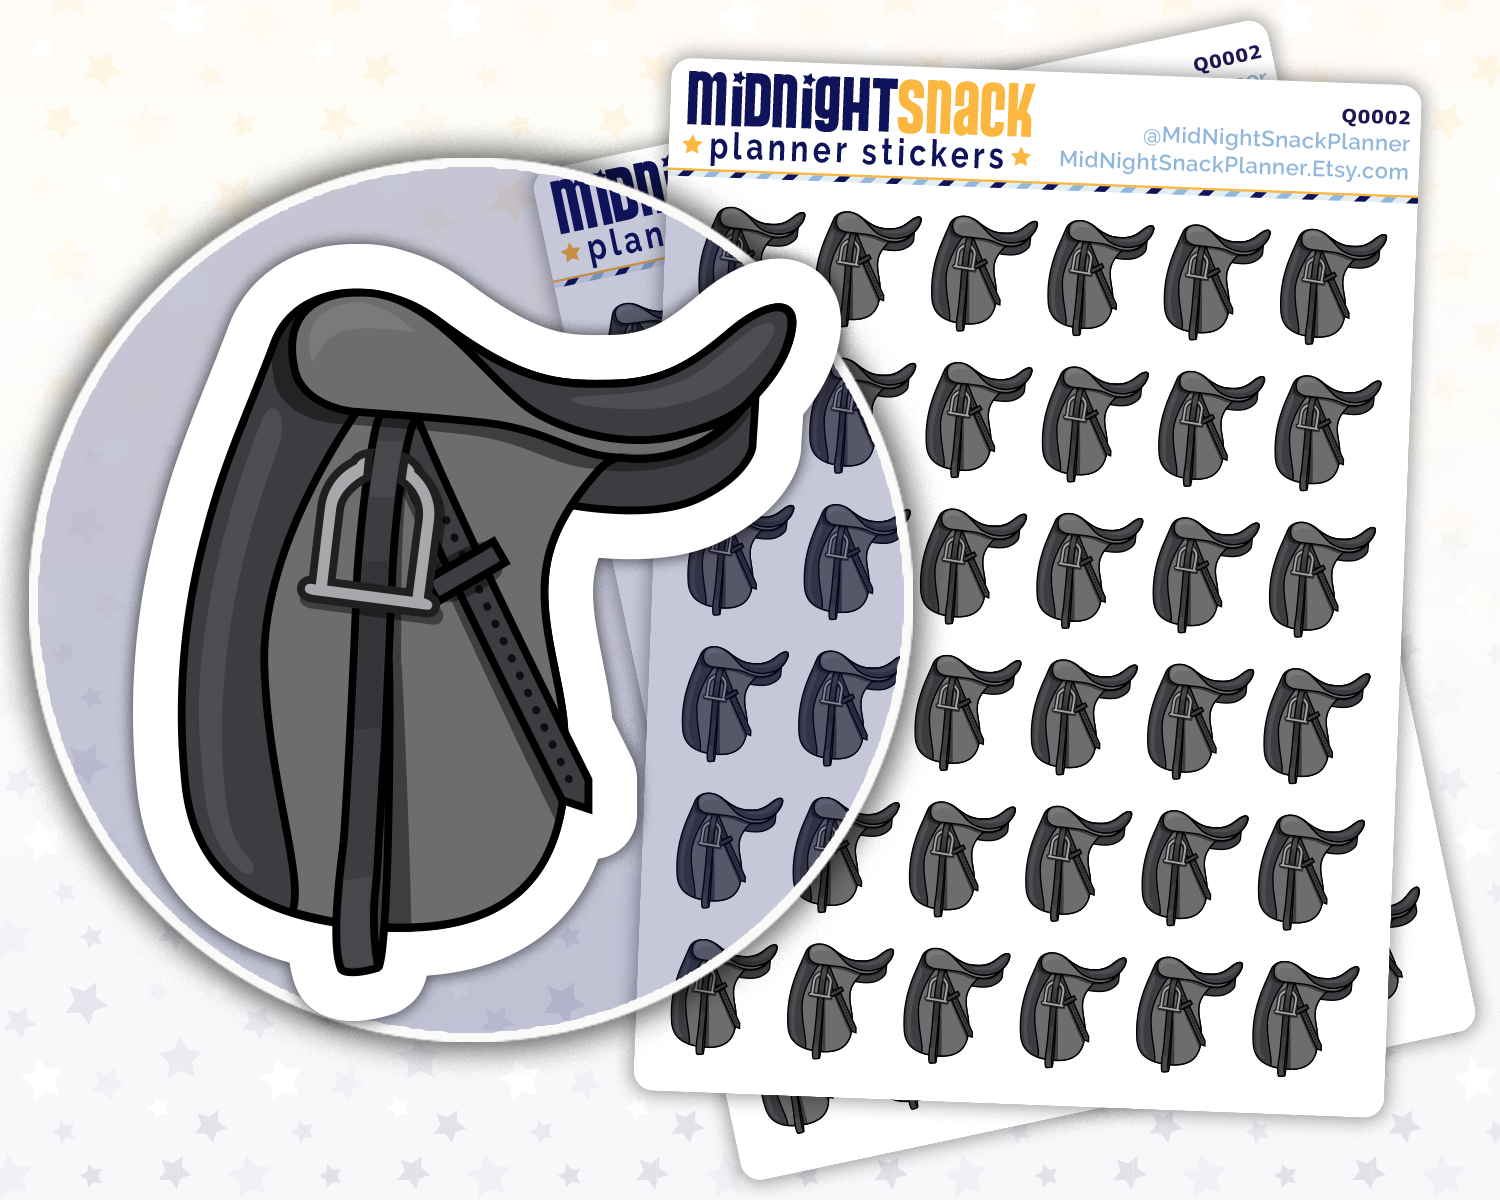 Dressage Saddle Icon: Horse Back Riding Planner Stickers Midnight Snack Planner